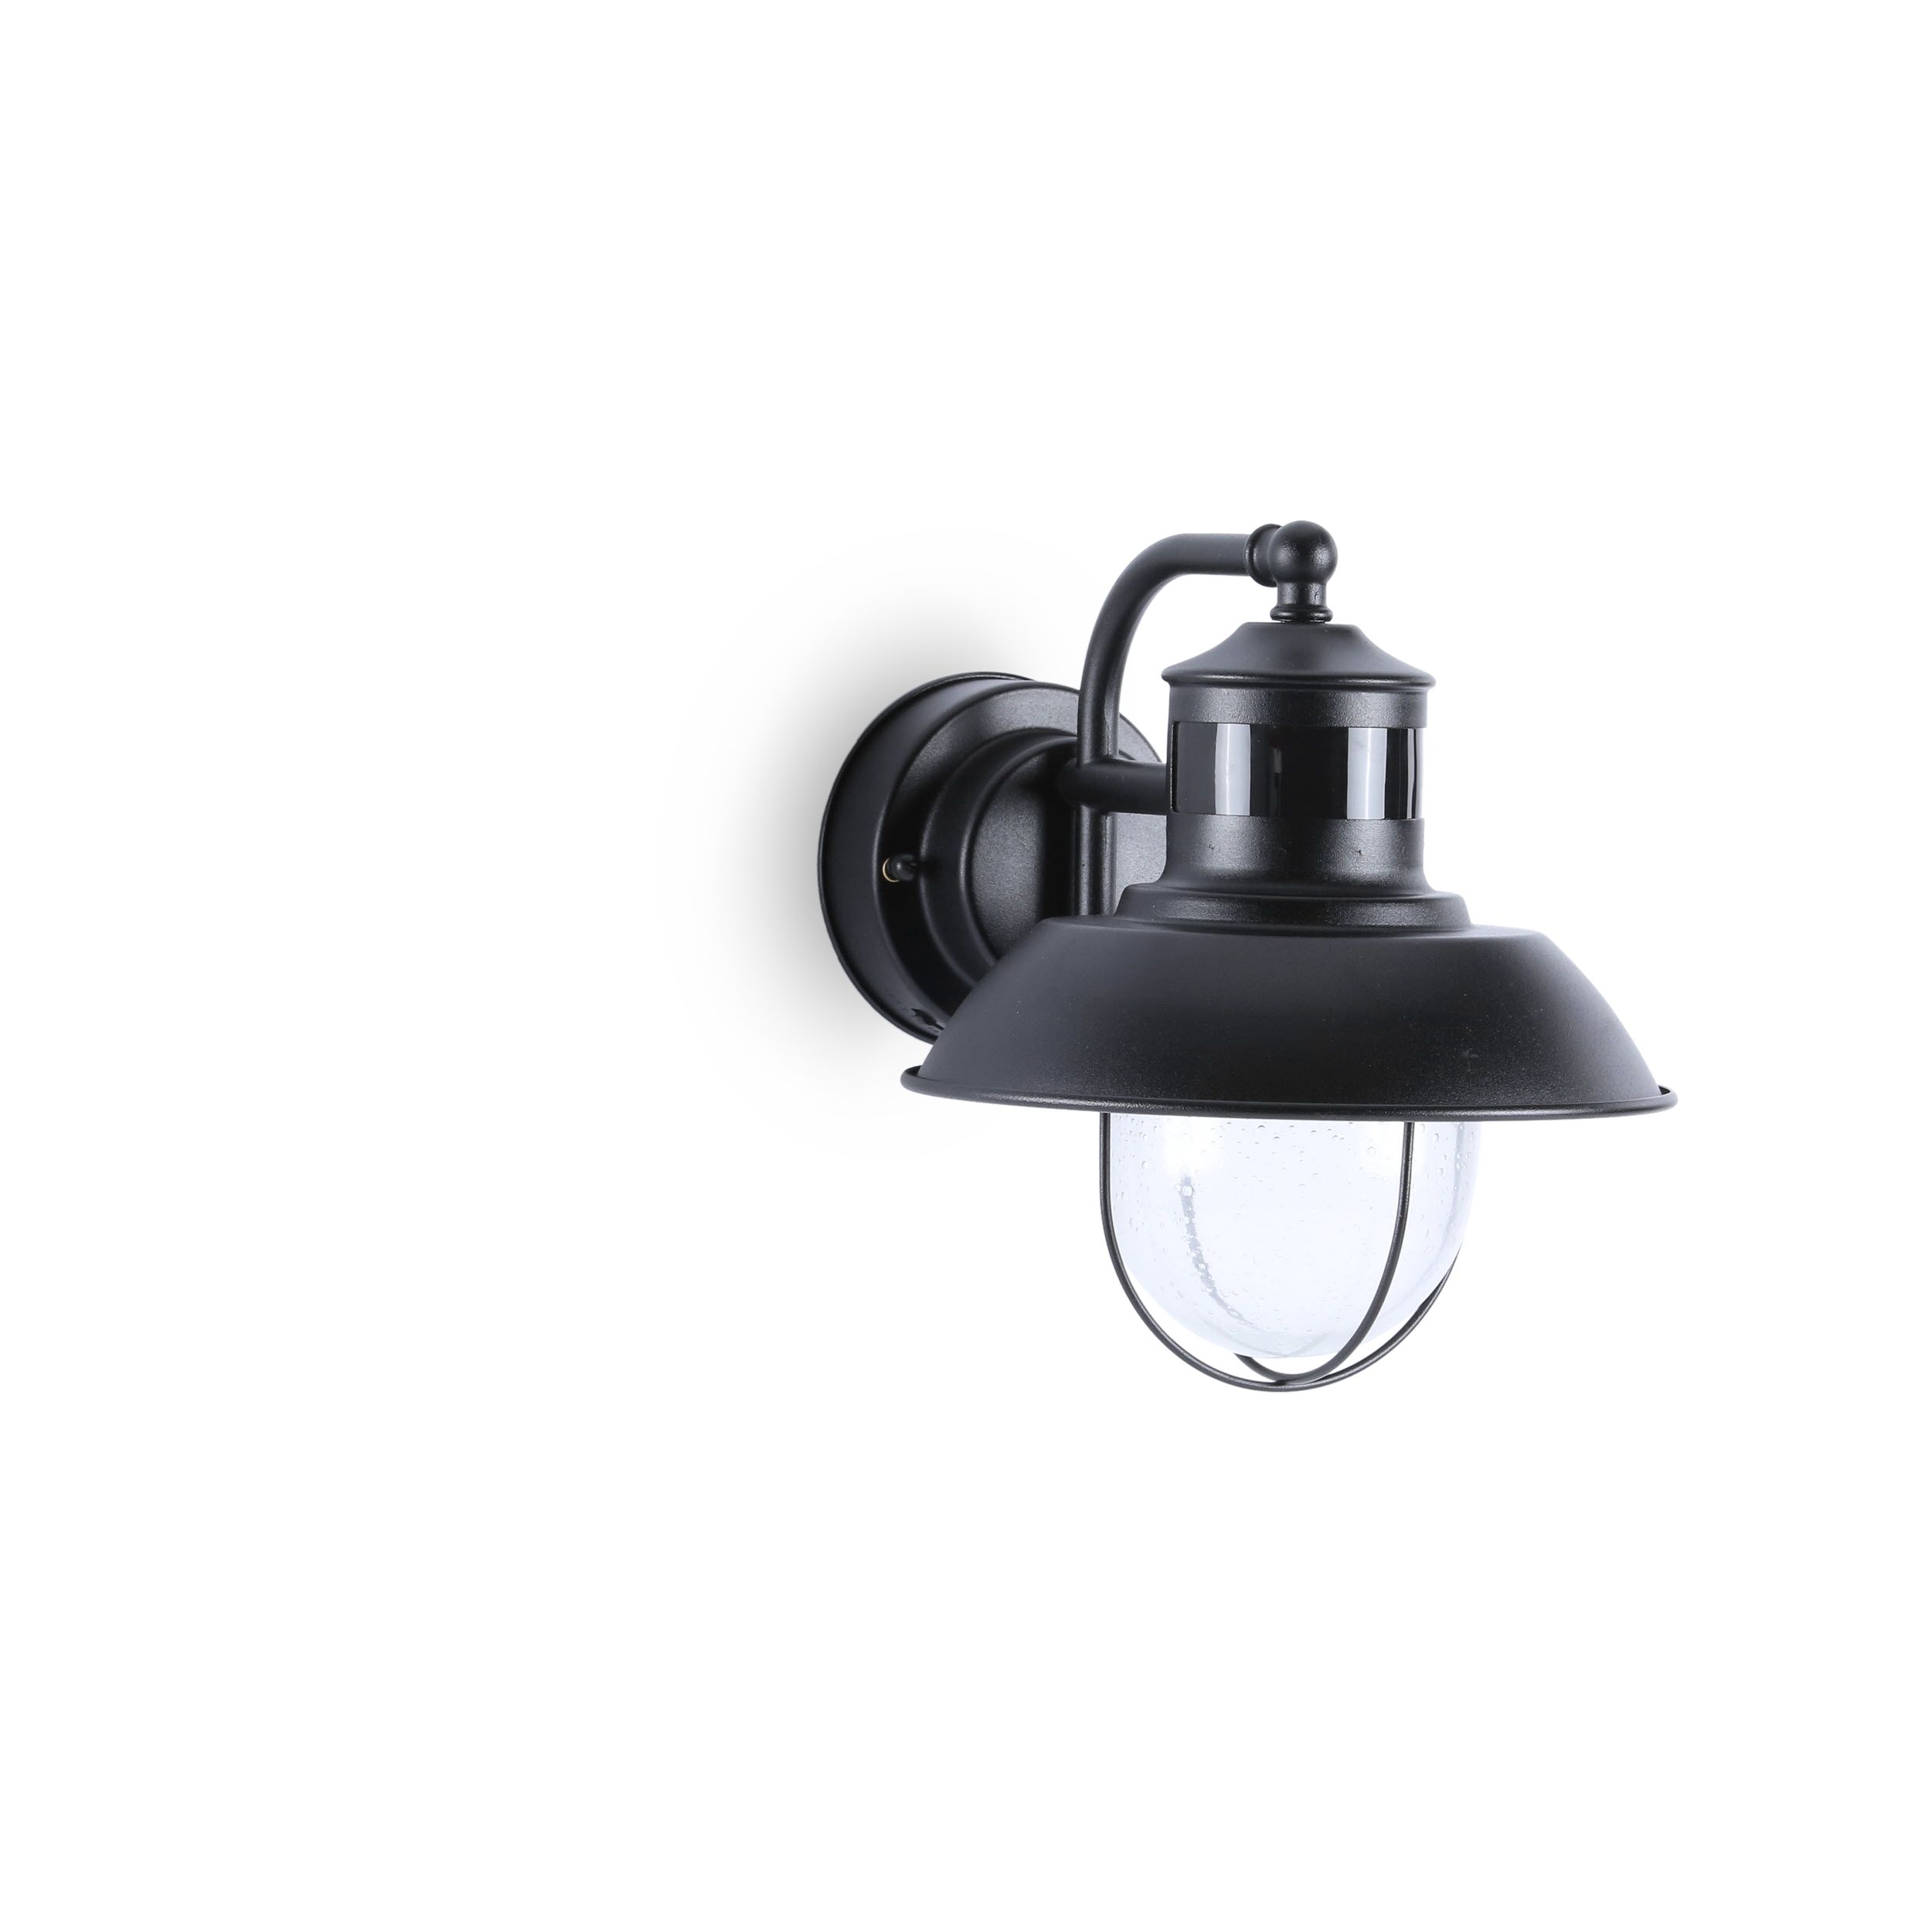 CHESHAM OUTDOOR PIR WALL LIGHT IN TEXTURED BLACK WITH CLEAR GLASS SHADE 70331 